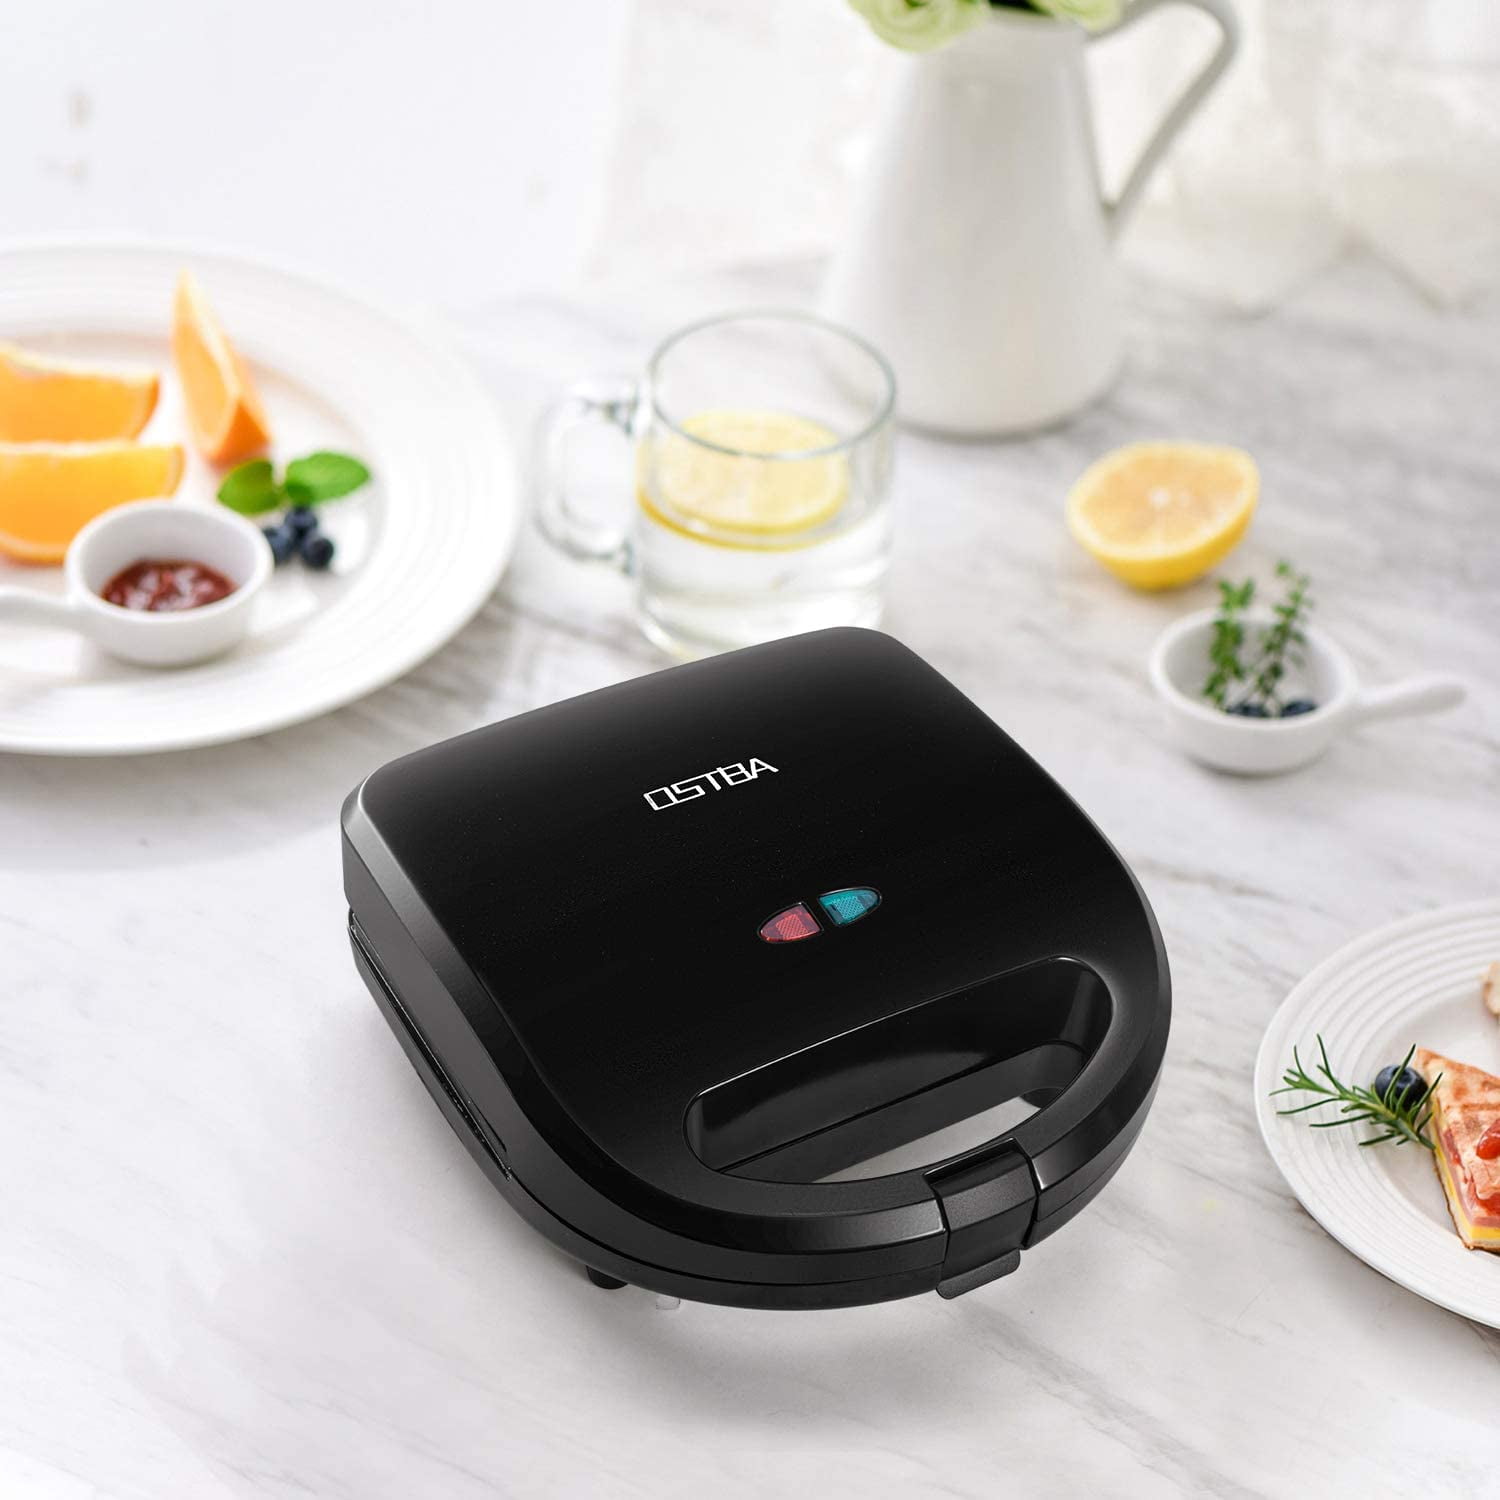 OSTBA Sandwich Maker, Toaster And Electric Panini Press With Non-Stick  Plates, LED Indicator Lights, Cool Touch Handle, Black